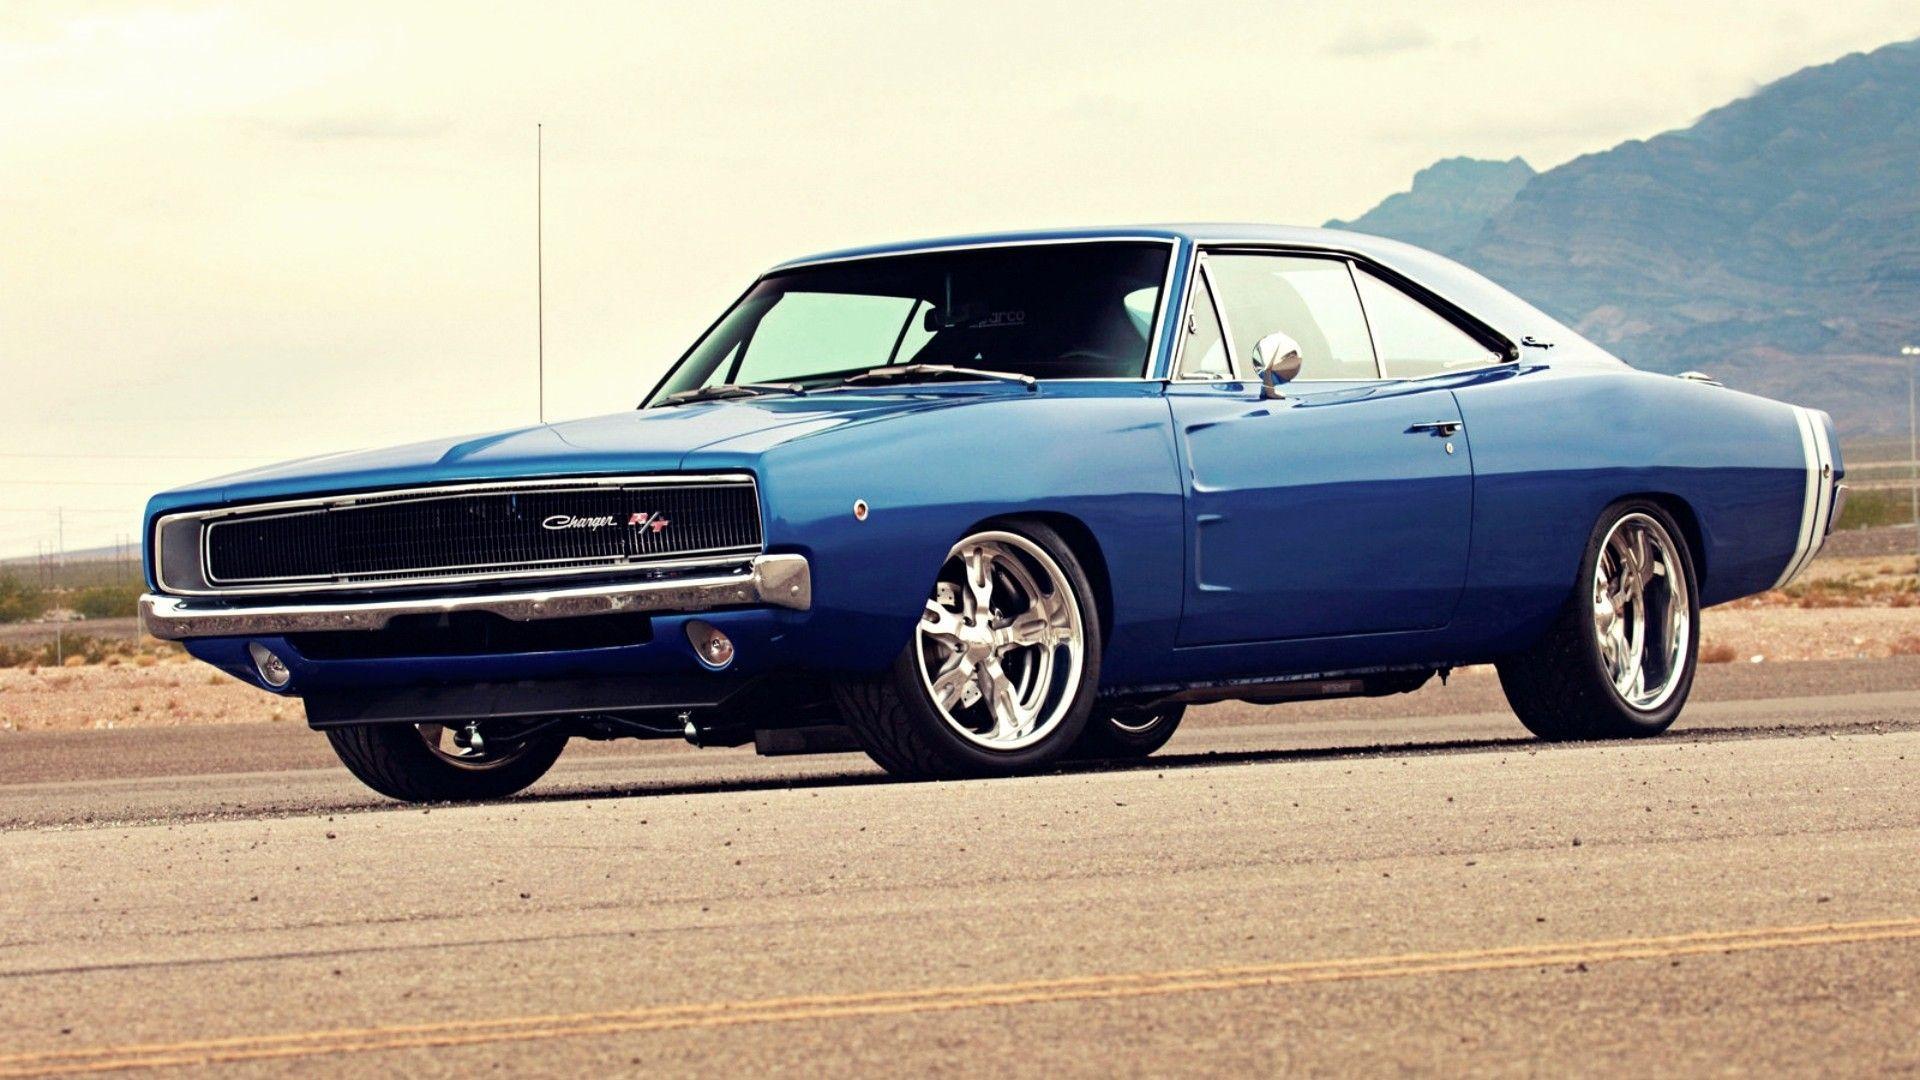 1970 Dodge Charger Wallpapers - Wallpaper Cave